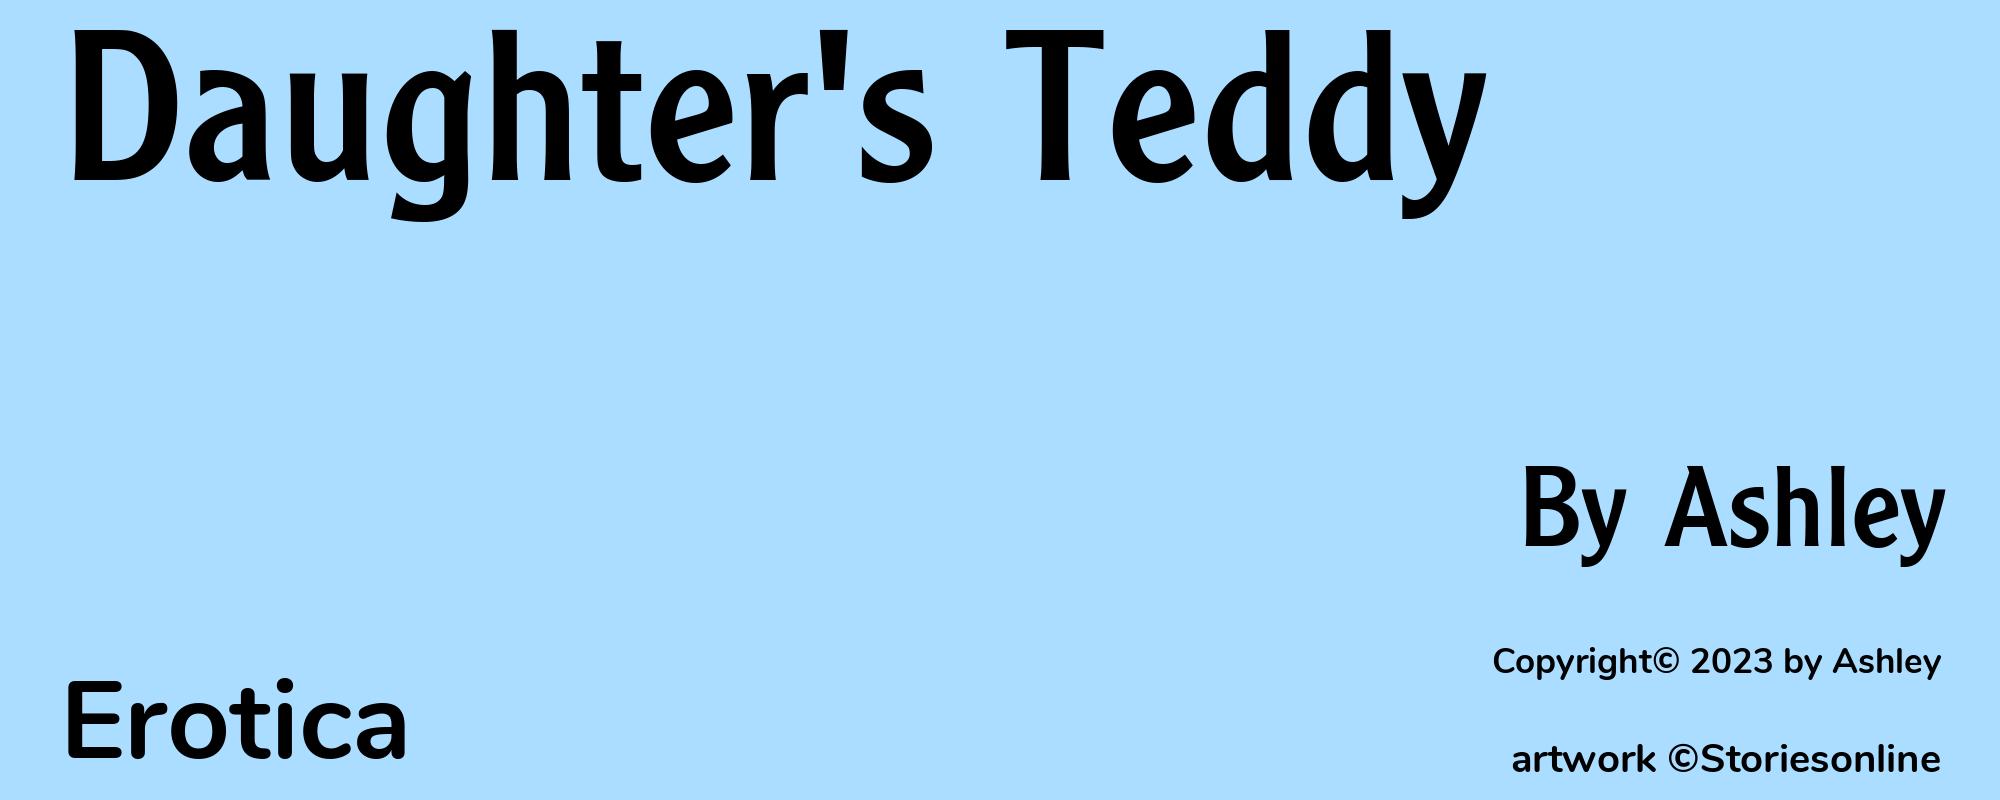 Daughter's Teddy - Cover